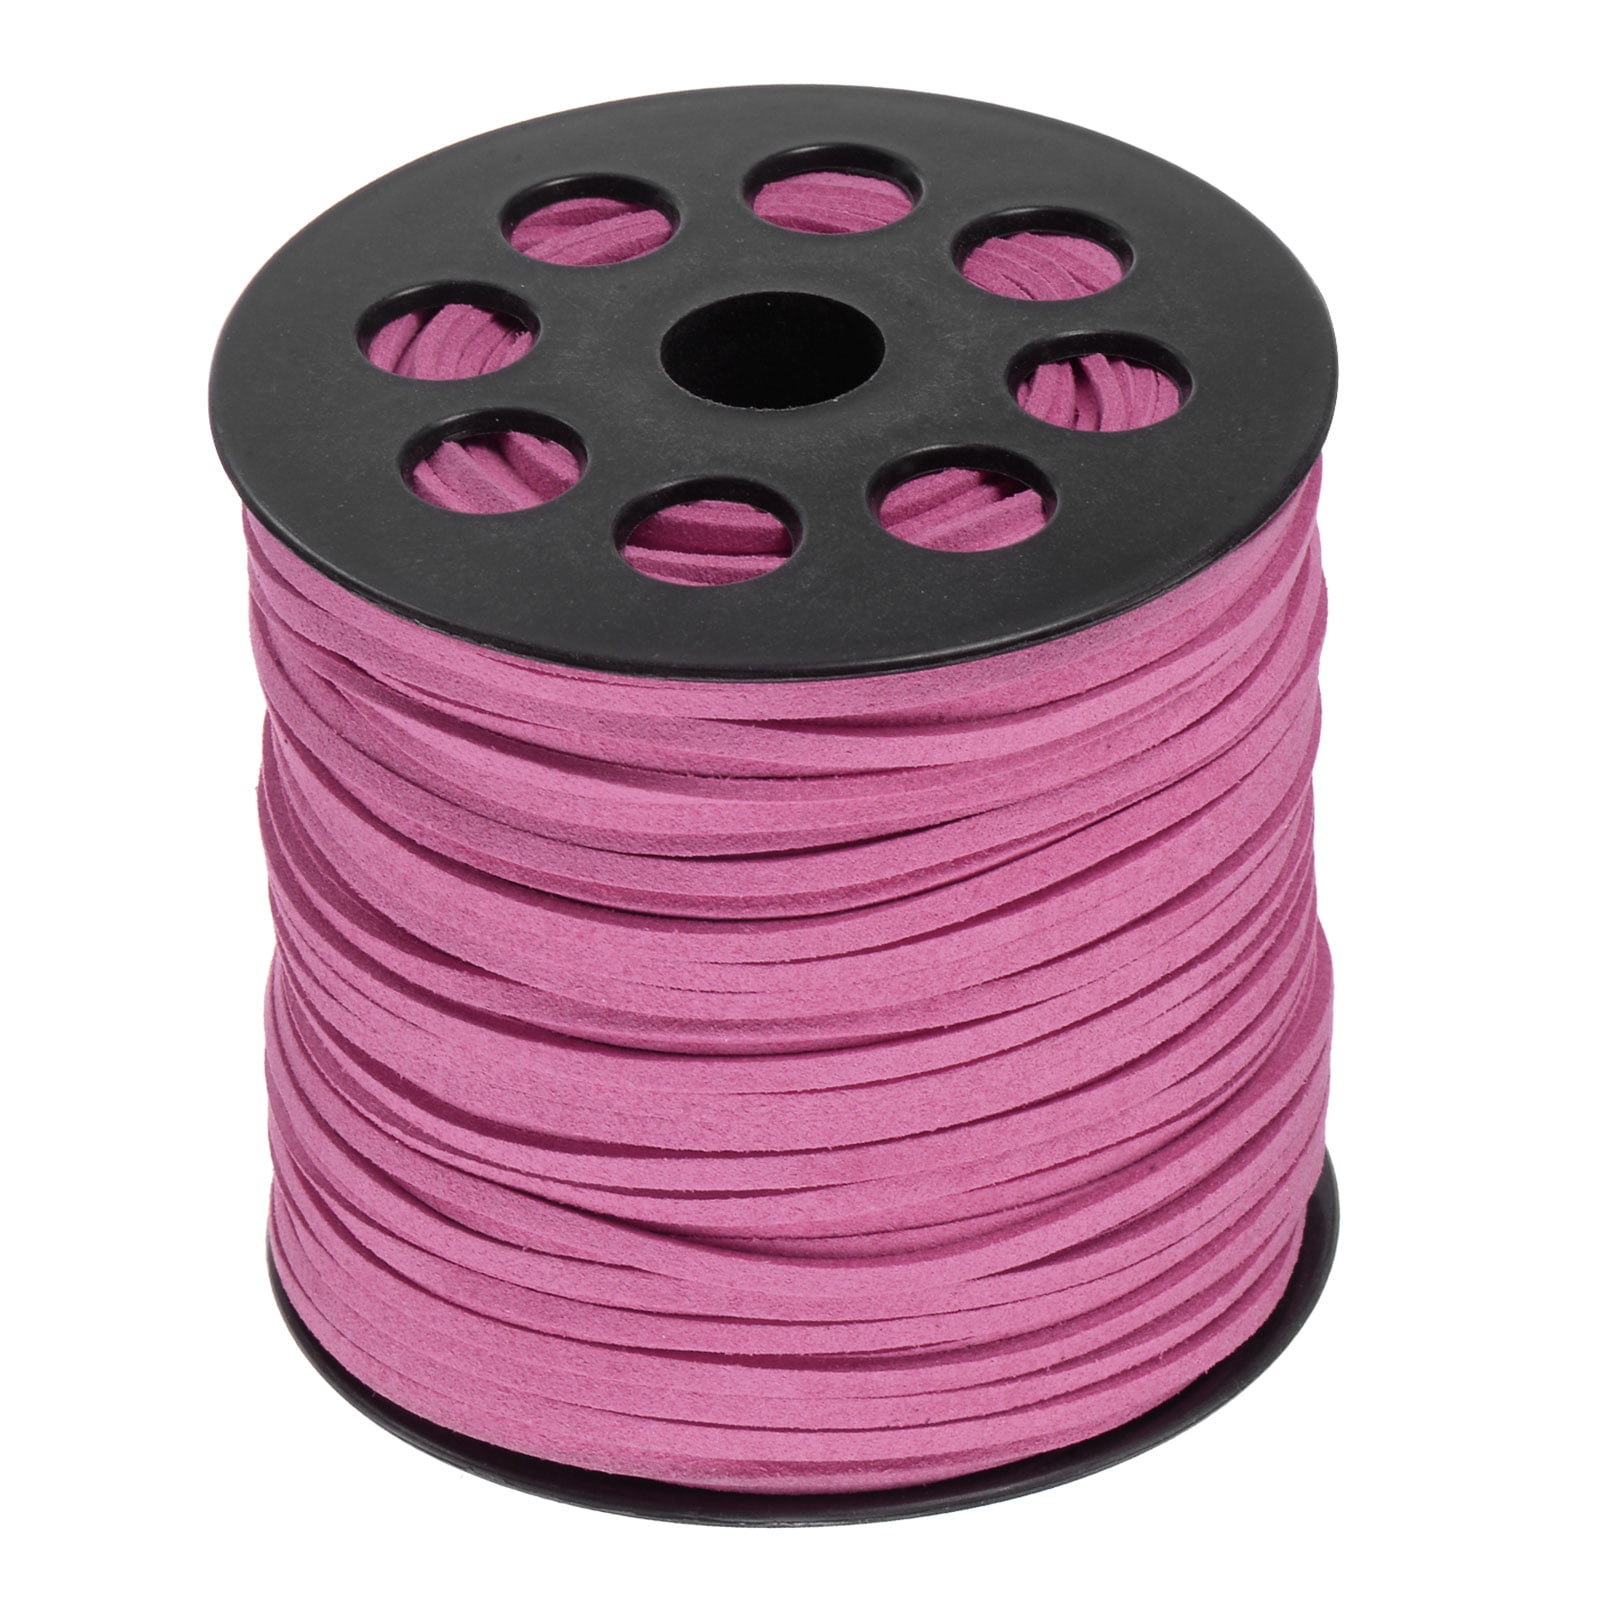 Faux Suede Cord 2.4mm Microfiber Beading Thread 100 Yards/90M Crafting  String for DIY, Charm Pink